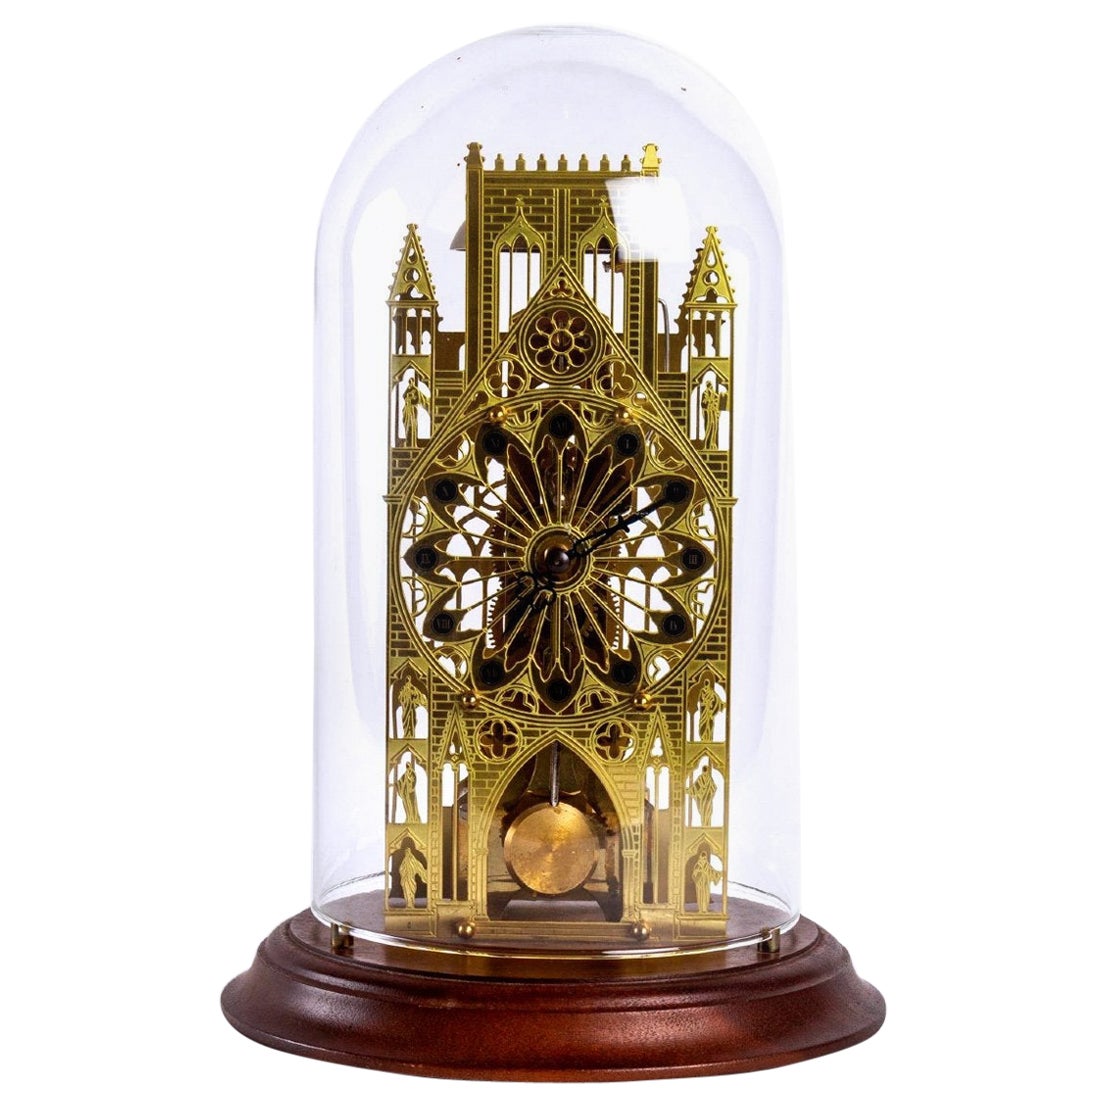 Skeleton Clock, under Globe, York Minster Cathedral, Period: Xxth For Sale